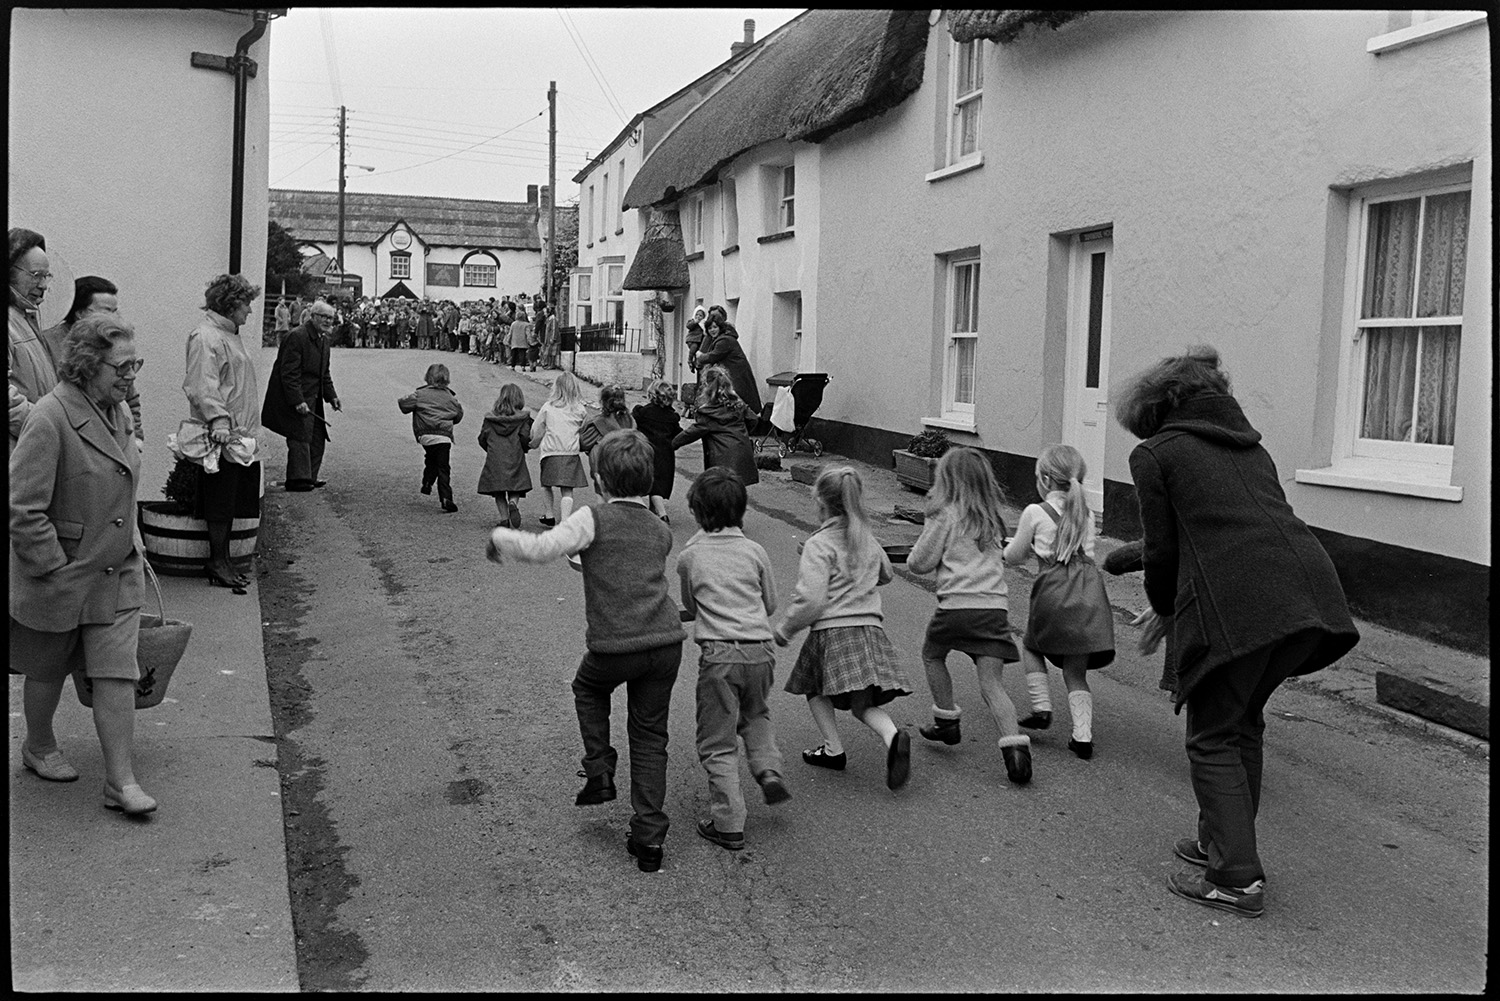 Shrove Tuesday Pancake Race in village street, children's races.
[Eleven children holding frying pans with pancakes in a Shrove Tuesday Pancake Race along Fore Street, Dolton, with a crowd of men, women and children watching. In the background is a view of the front of the Royal Oak pub and thatched houses.]